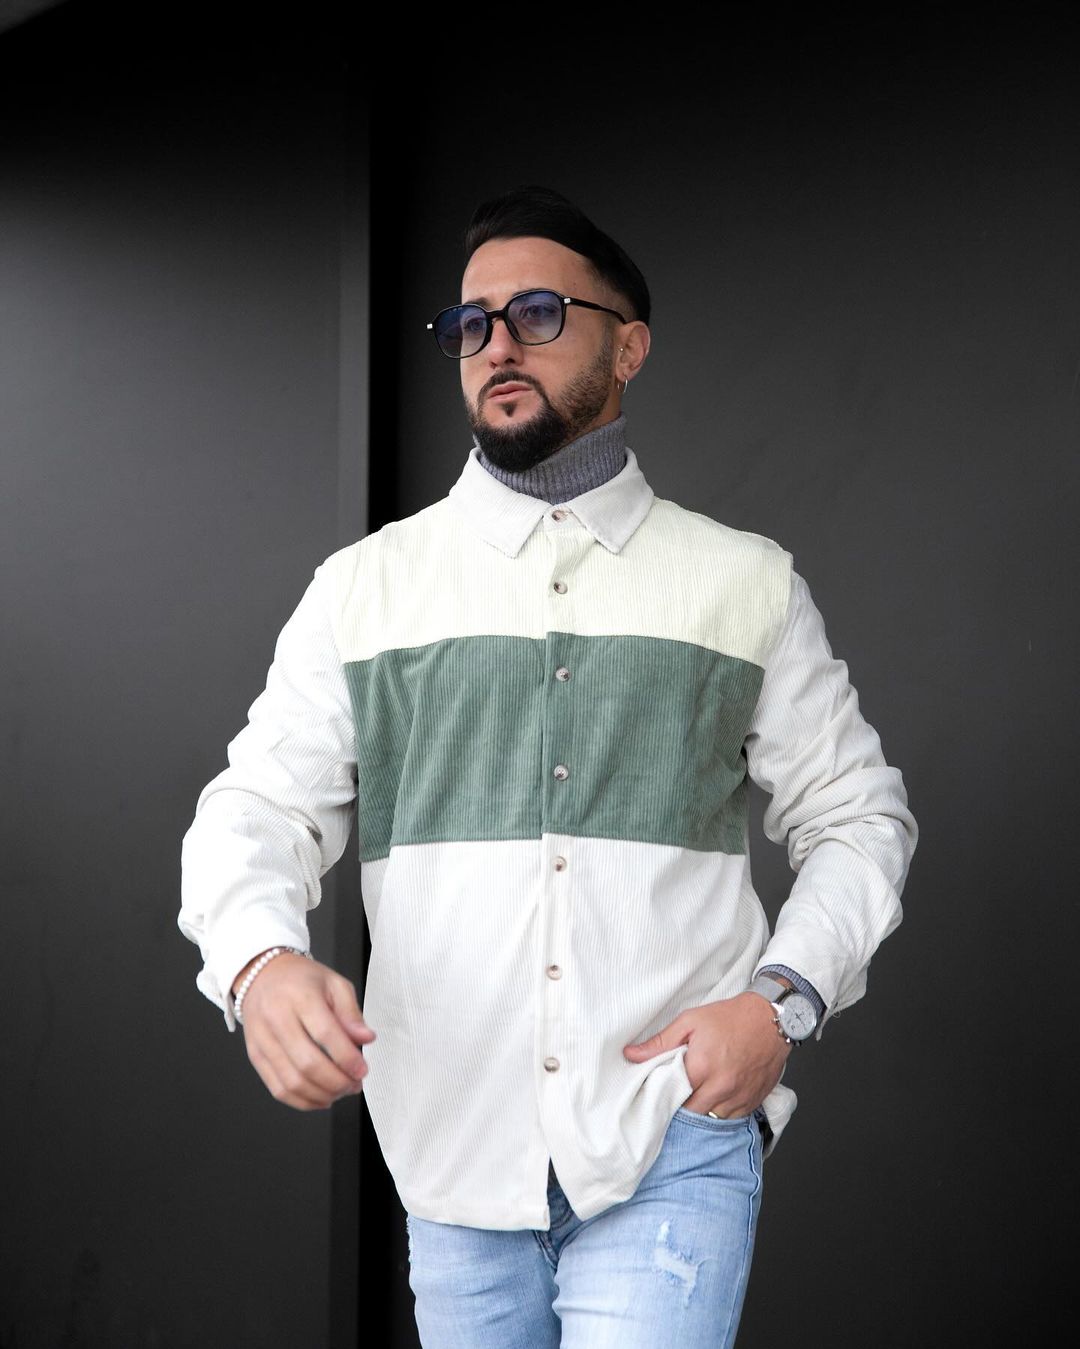 Tricolor overshirt